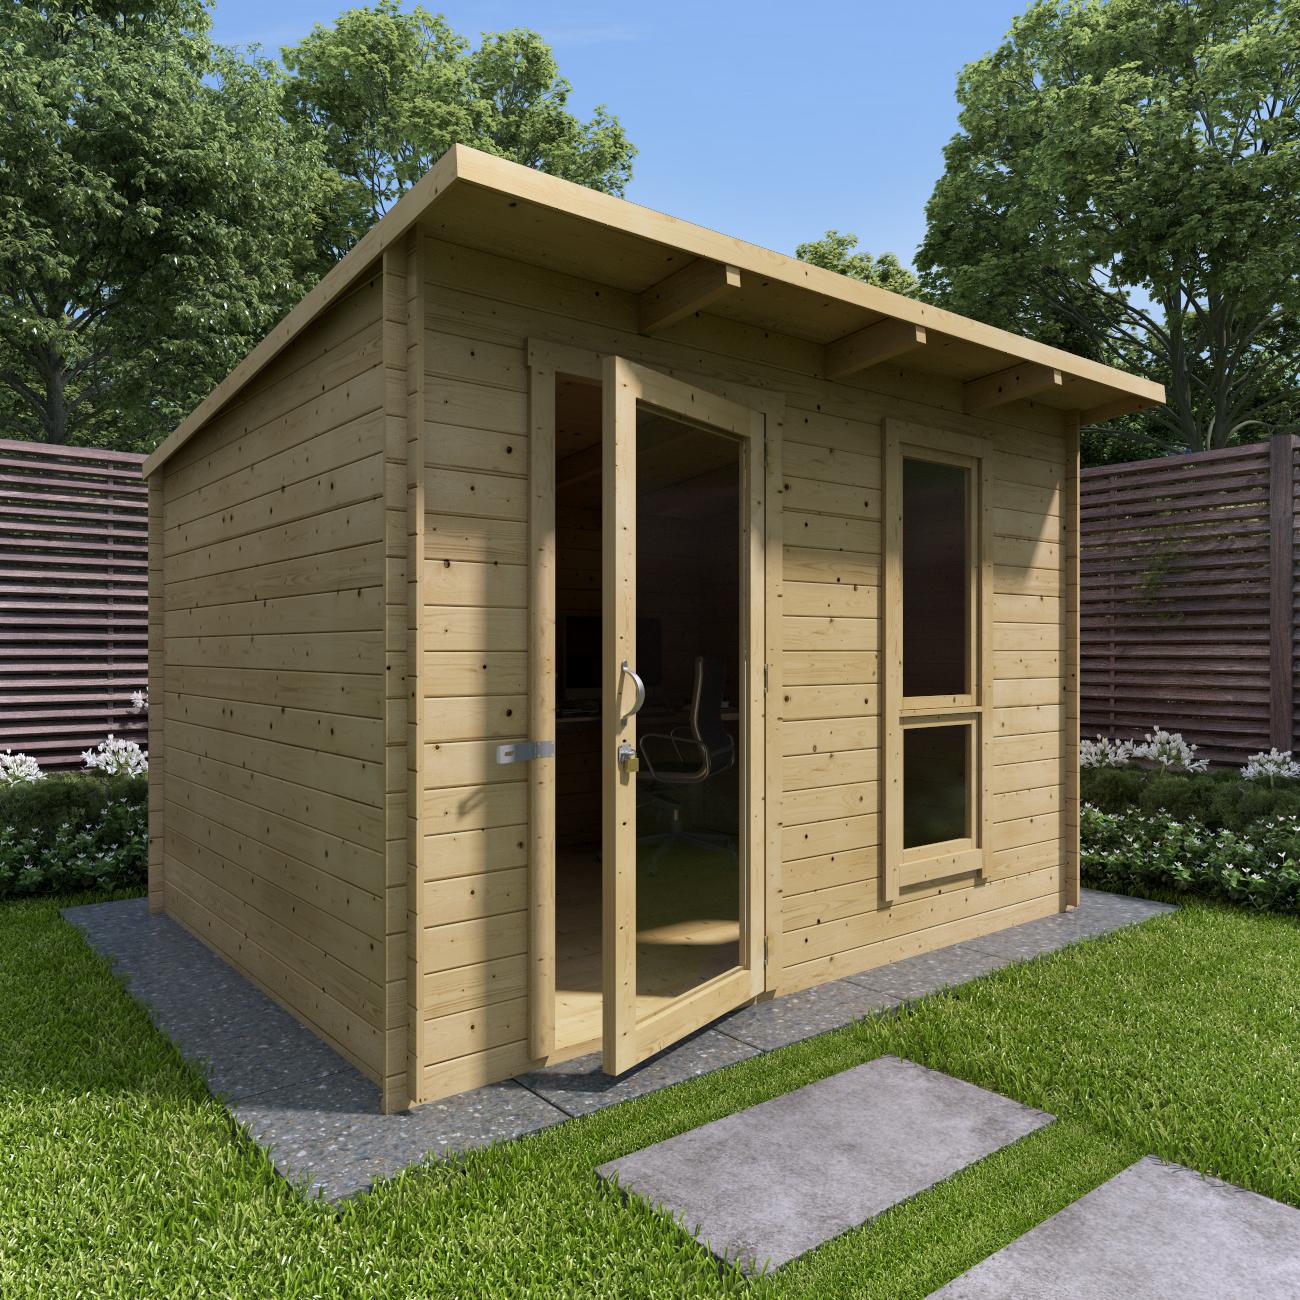 3 x 2.5 Pressure Treated Log Cabin - BillyOh Mia Log Cabin - 3.0m x 2.5m Wooden Building - 19mm Tongue & Groove Wall